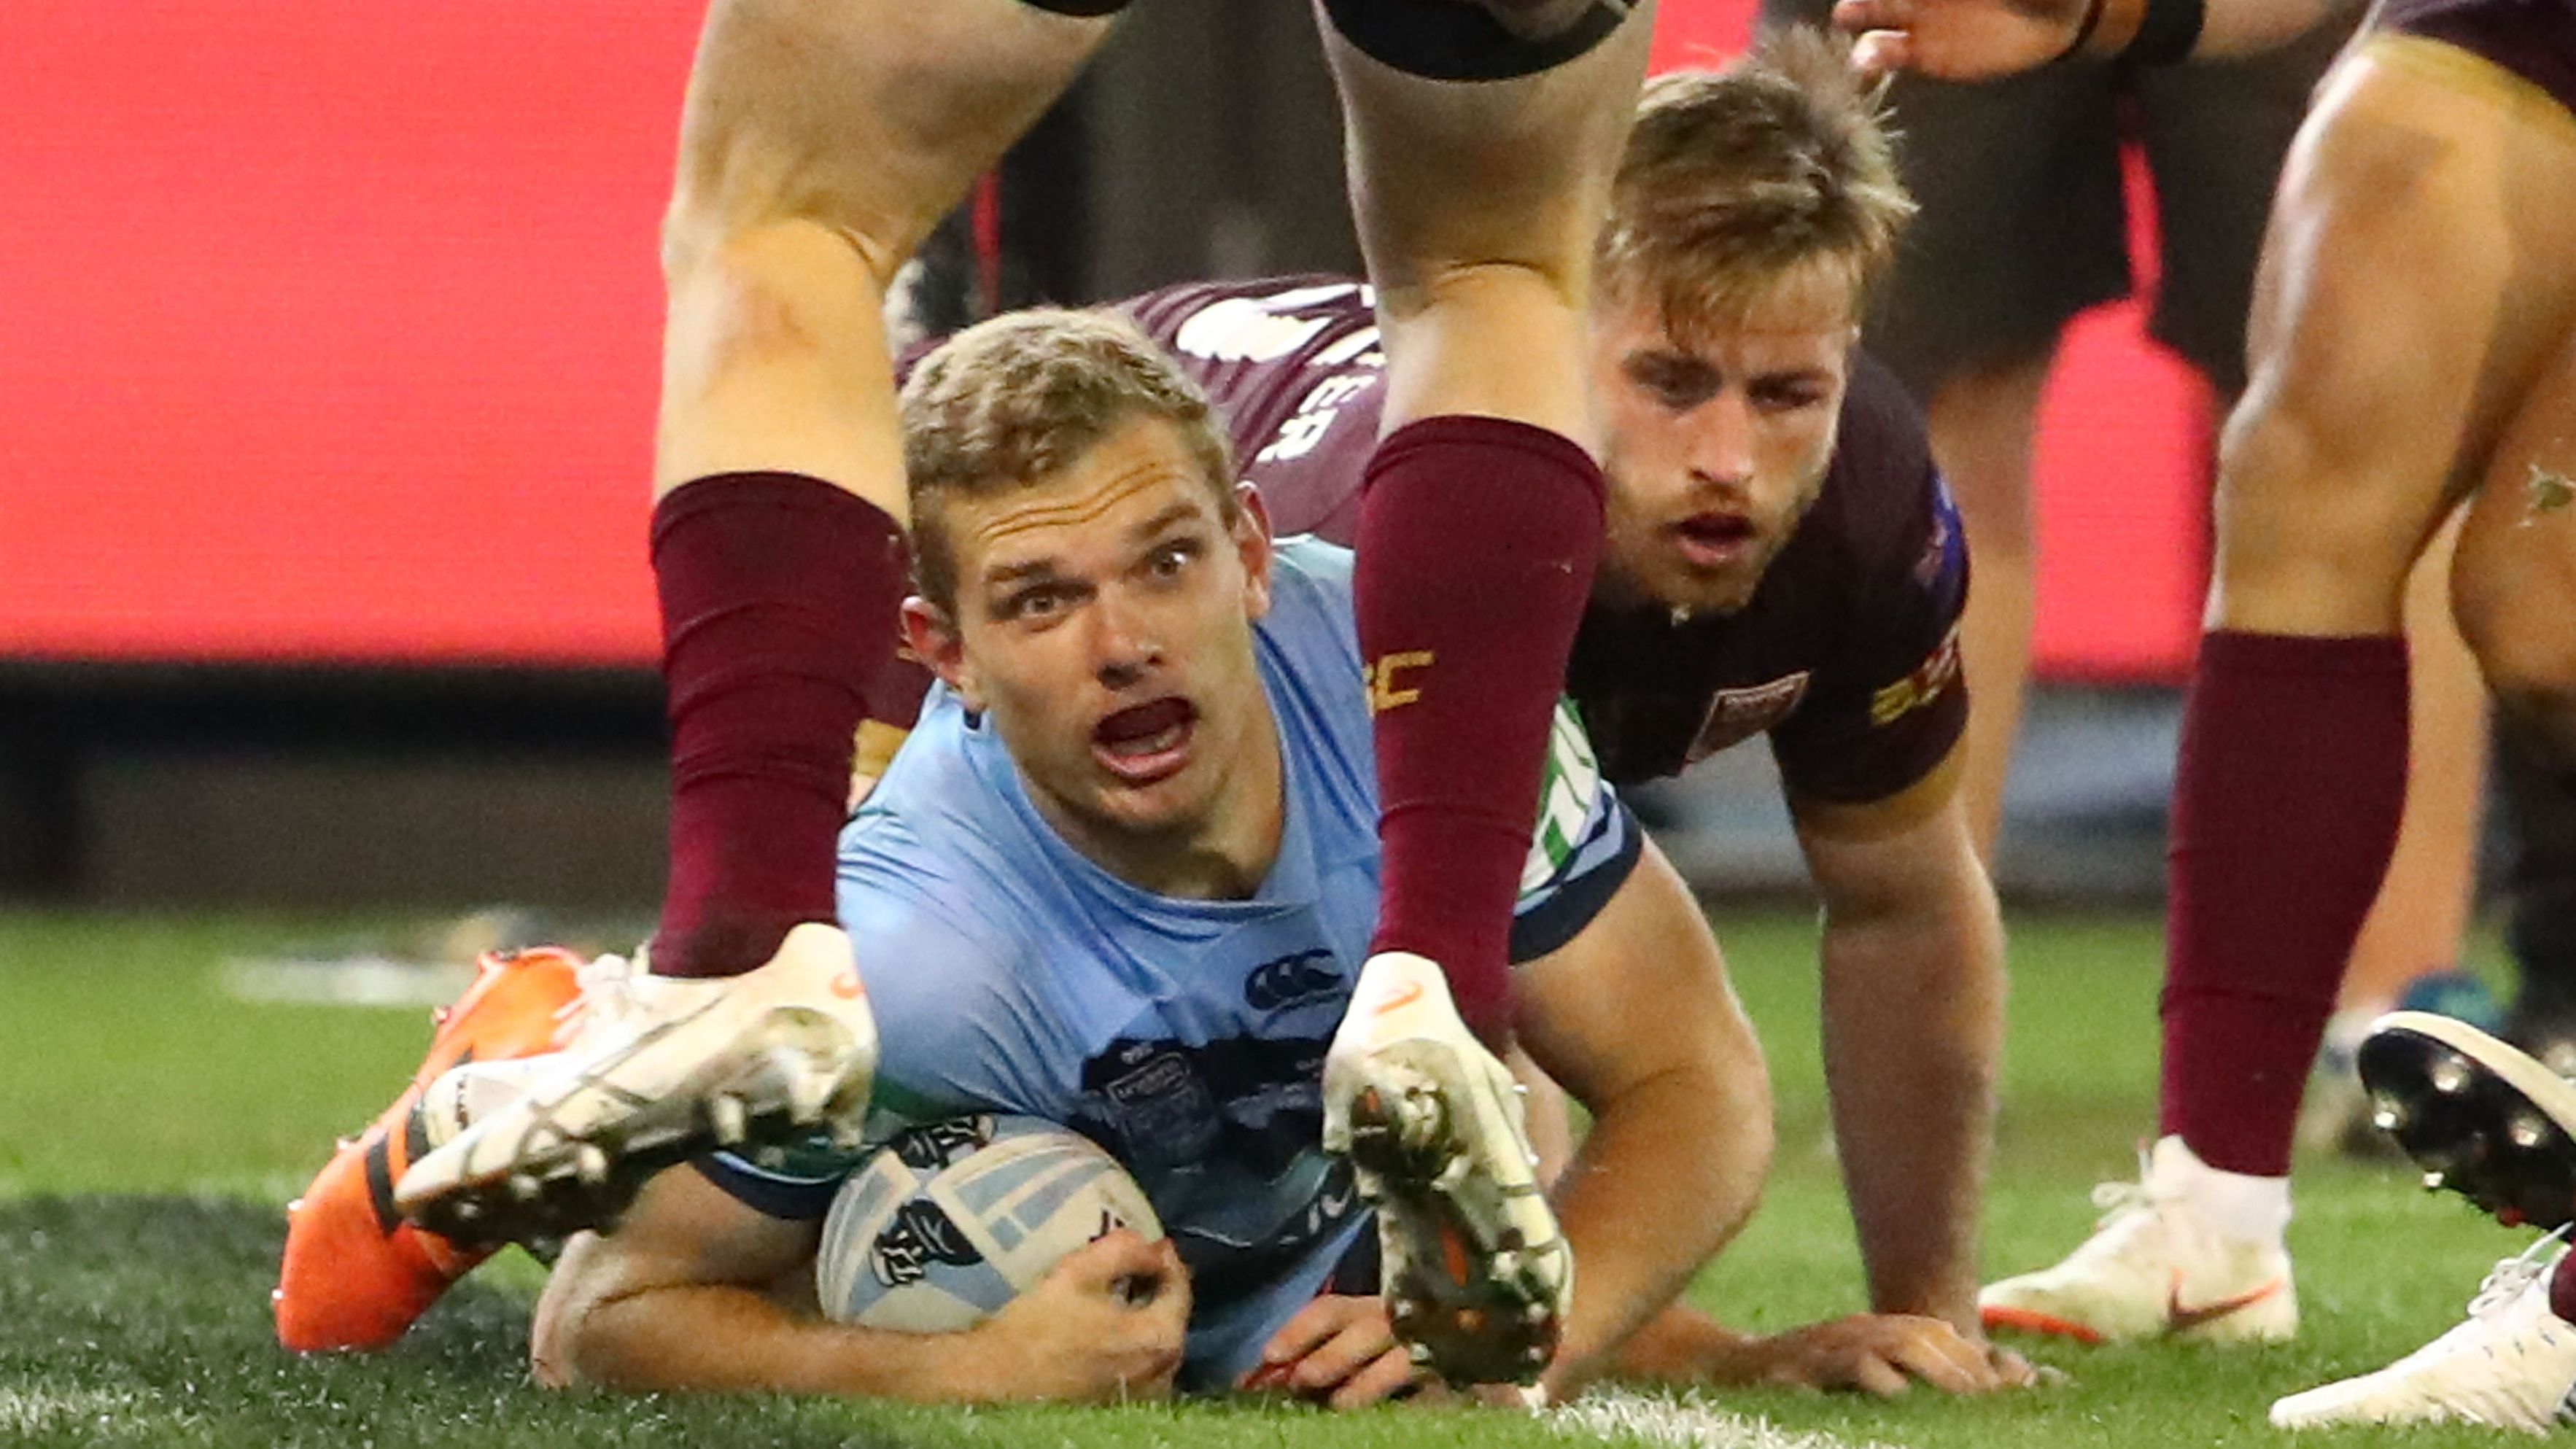 Blues star Tom Trbojevic in action during State of Origin.